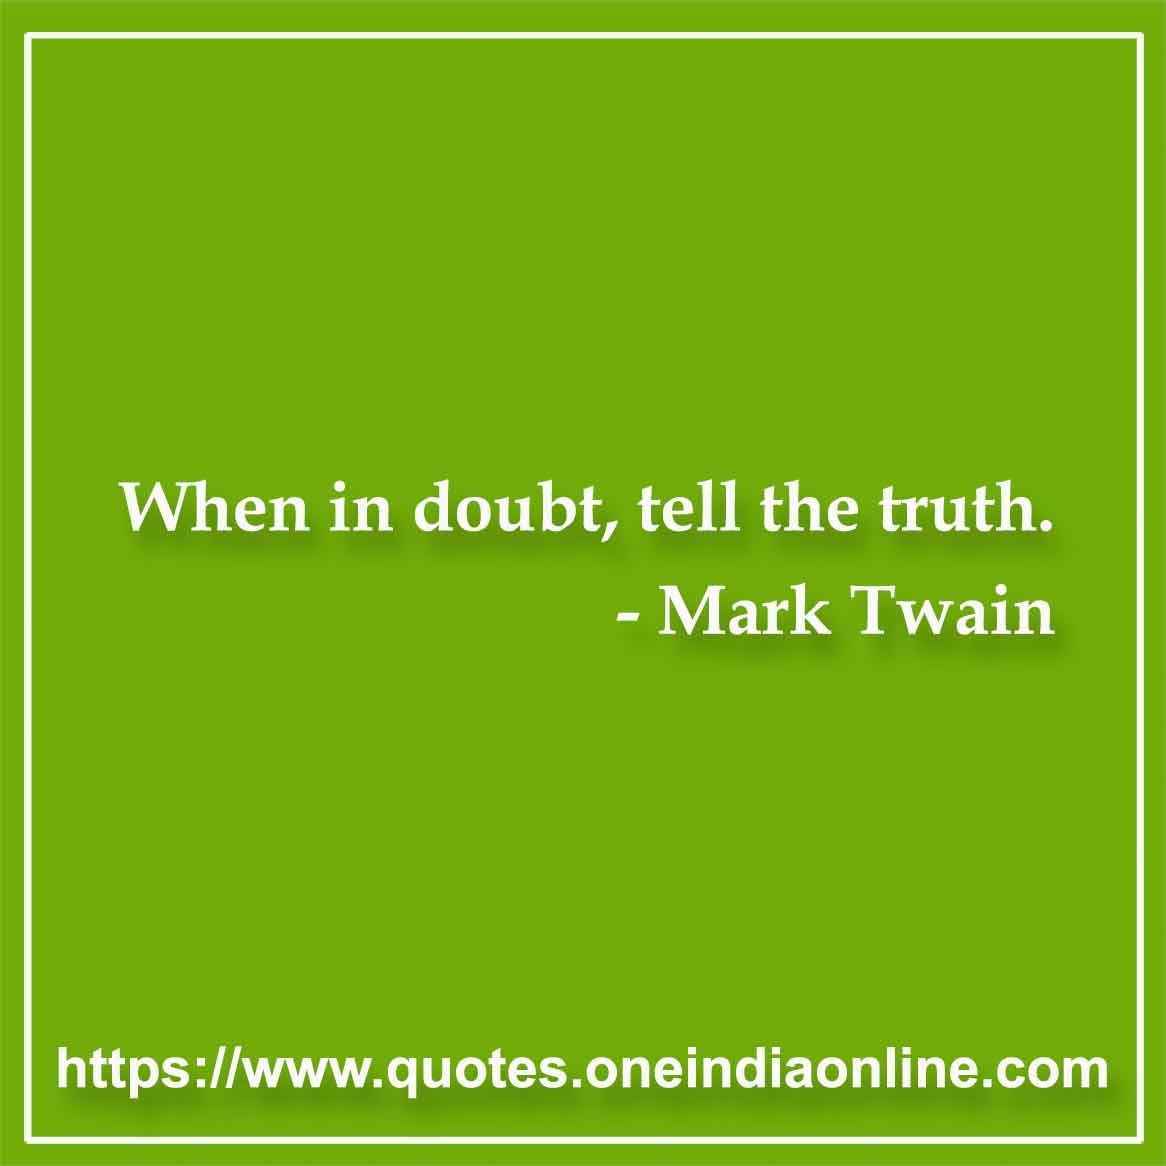 When in doubt, tell the truth.

- Honesty Quotes by Mark Twain